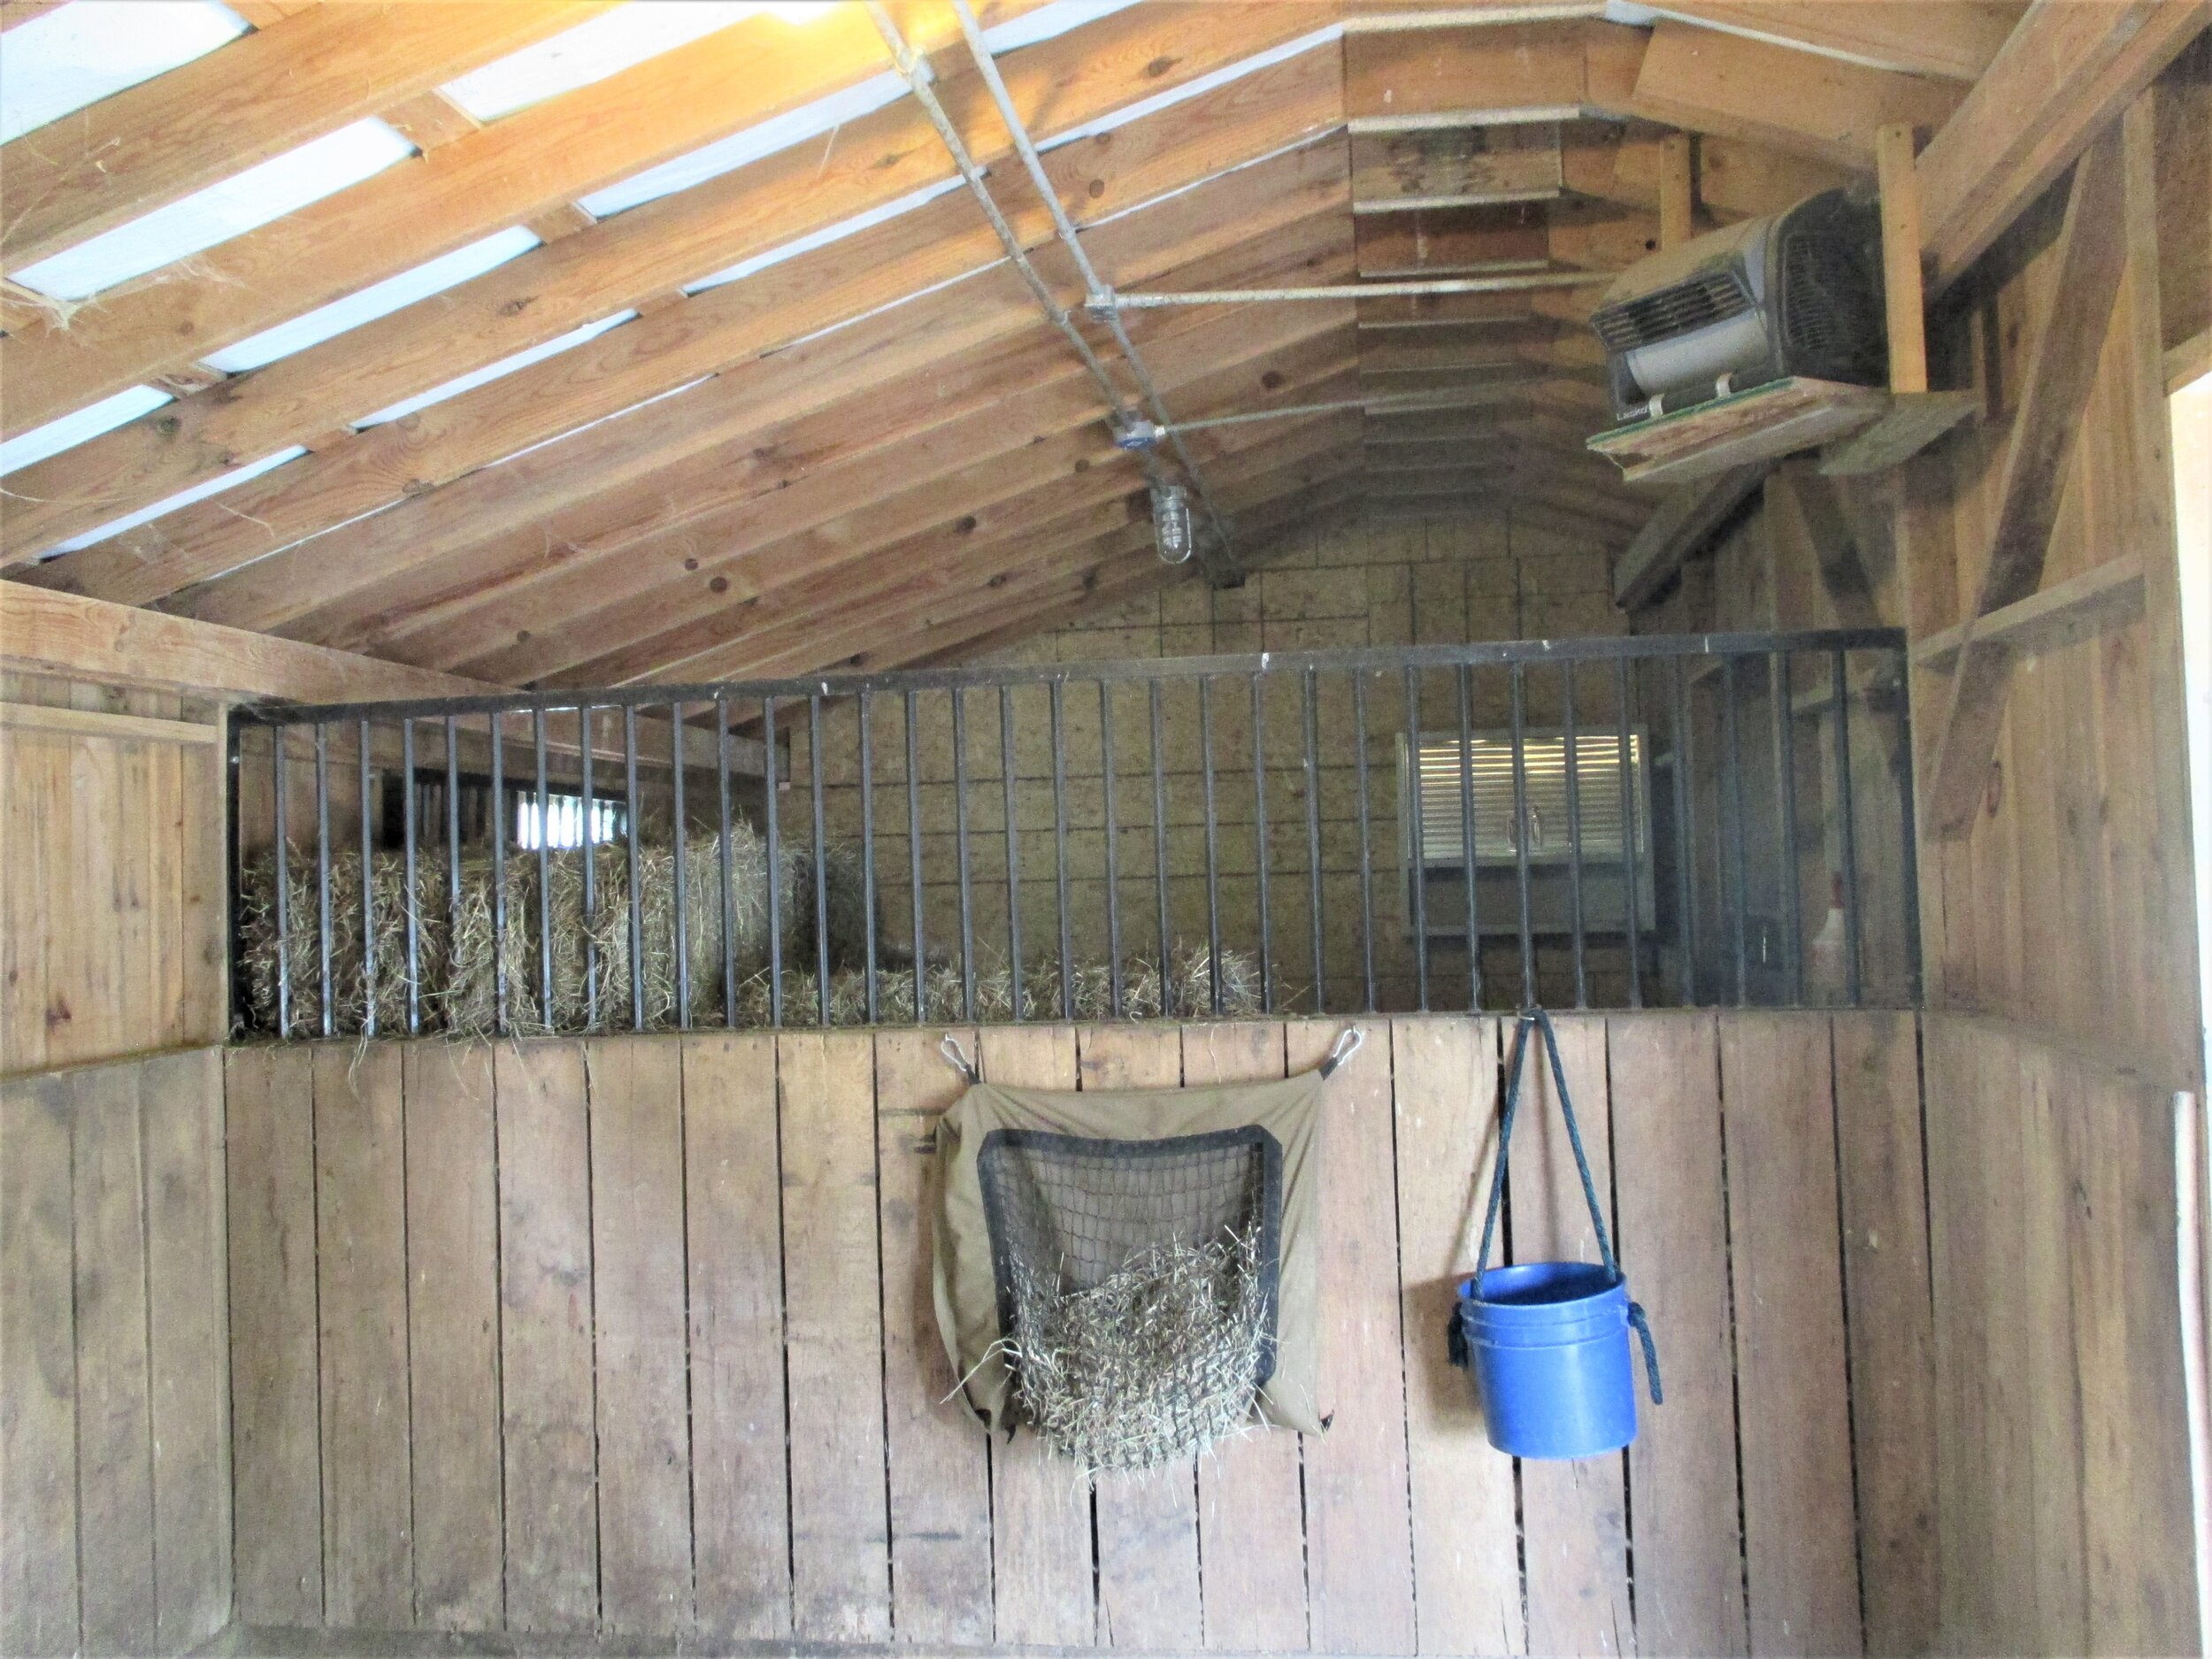 Each Stall has a Mounted Ventilating Fan